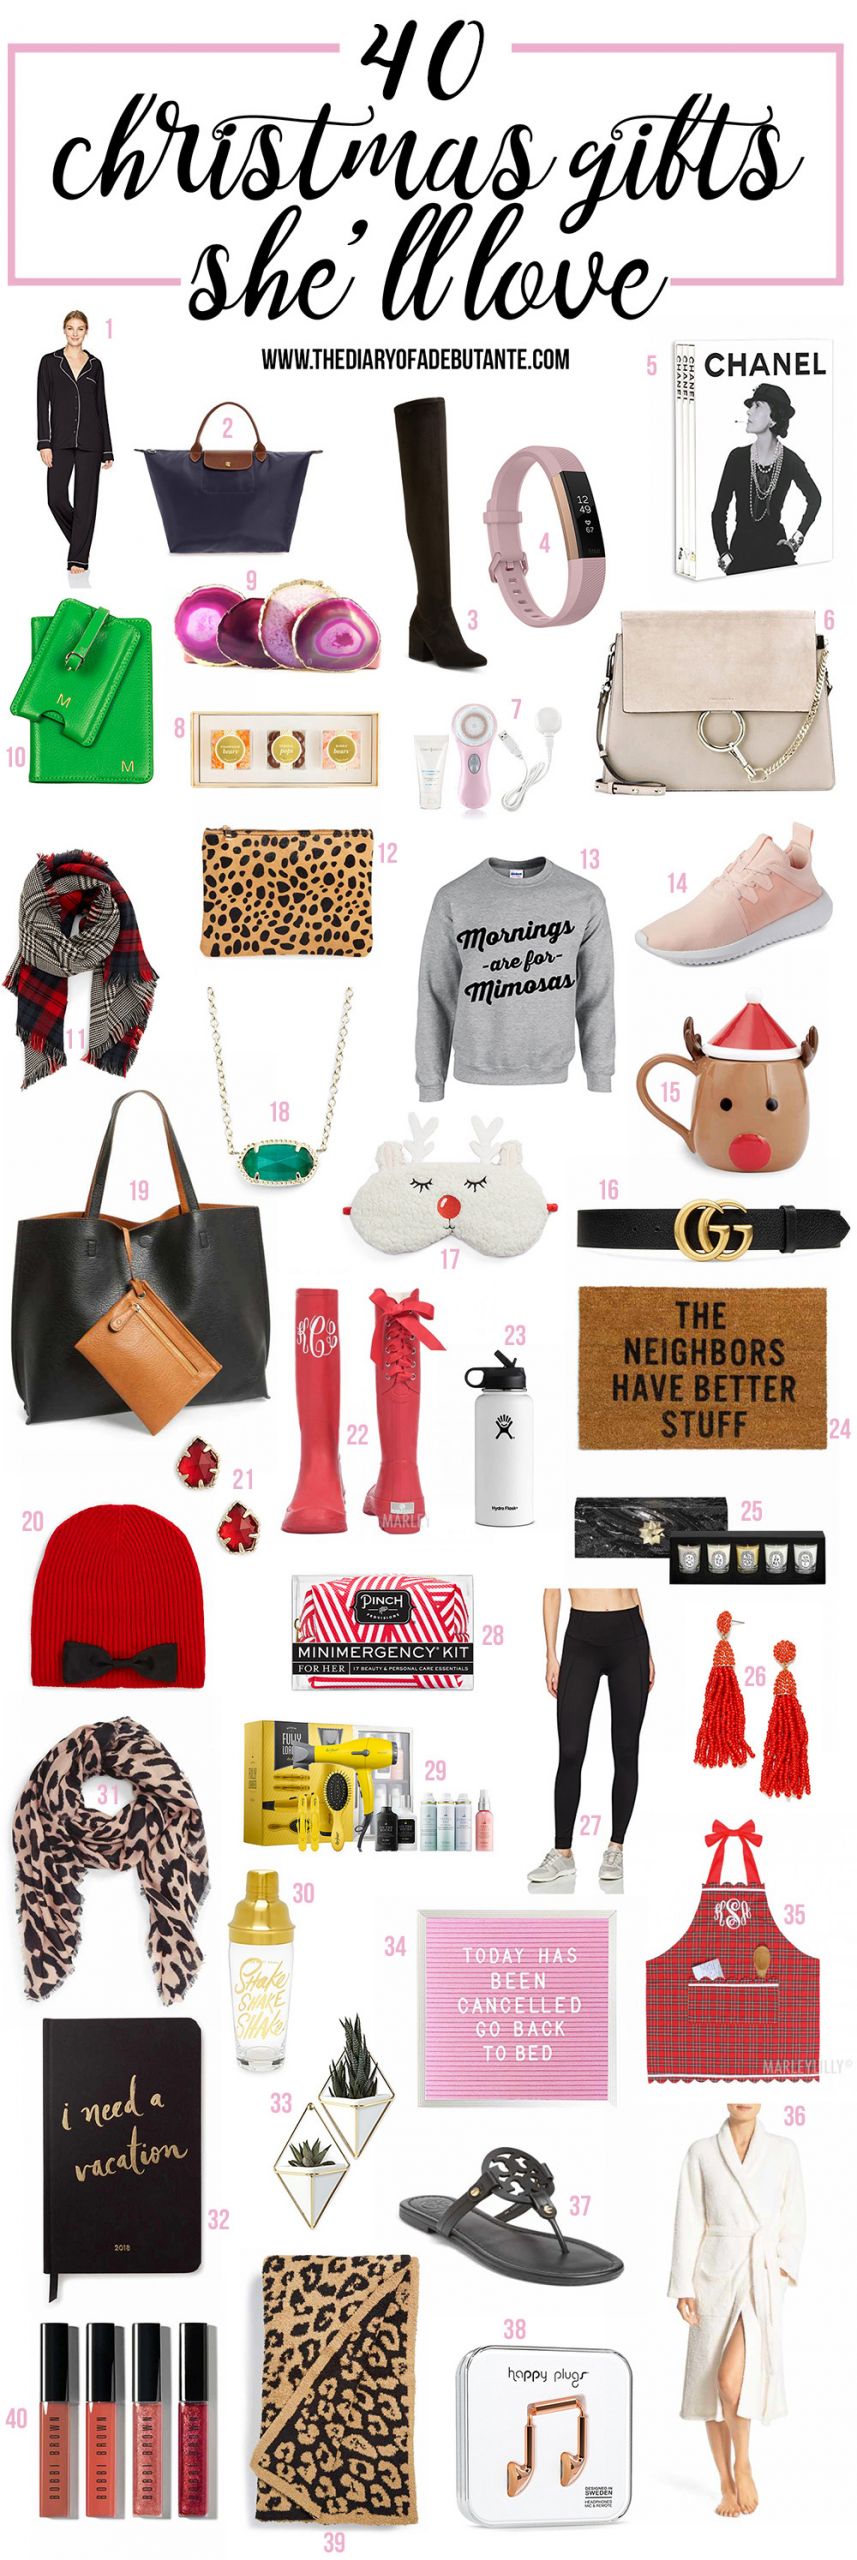 Gift Ideas For Girlfriends
 Cool Gift Ideas for Girlfriend Mom or BFF this Holiday